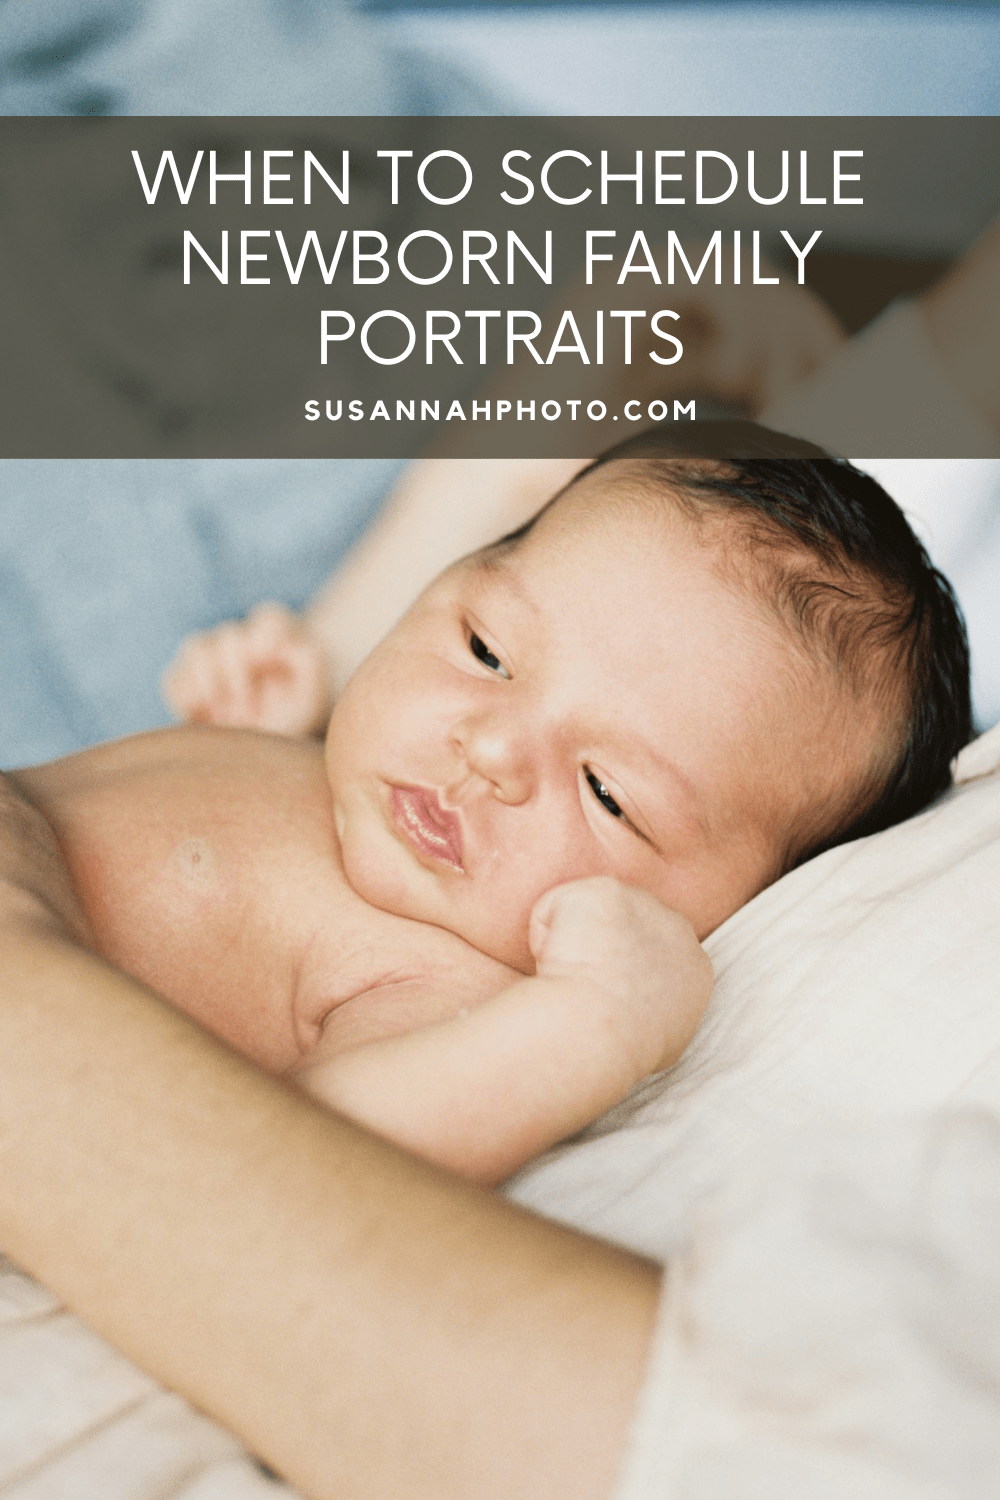 cute newborn baby in mom's arms with text over image that reads "When to schedule newborn family portraits."